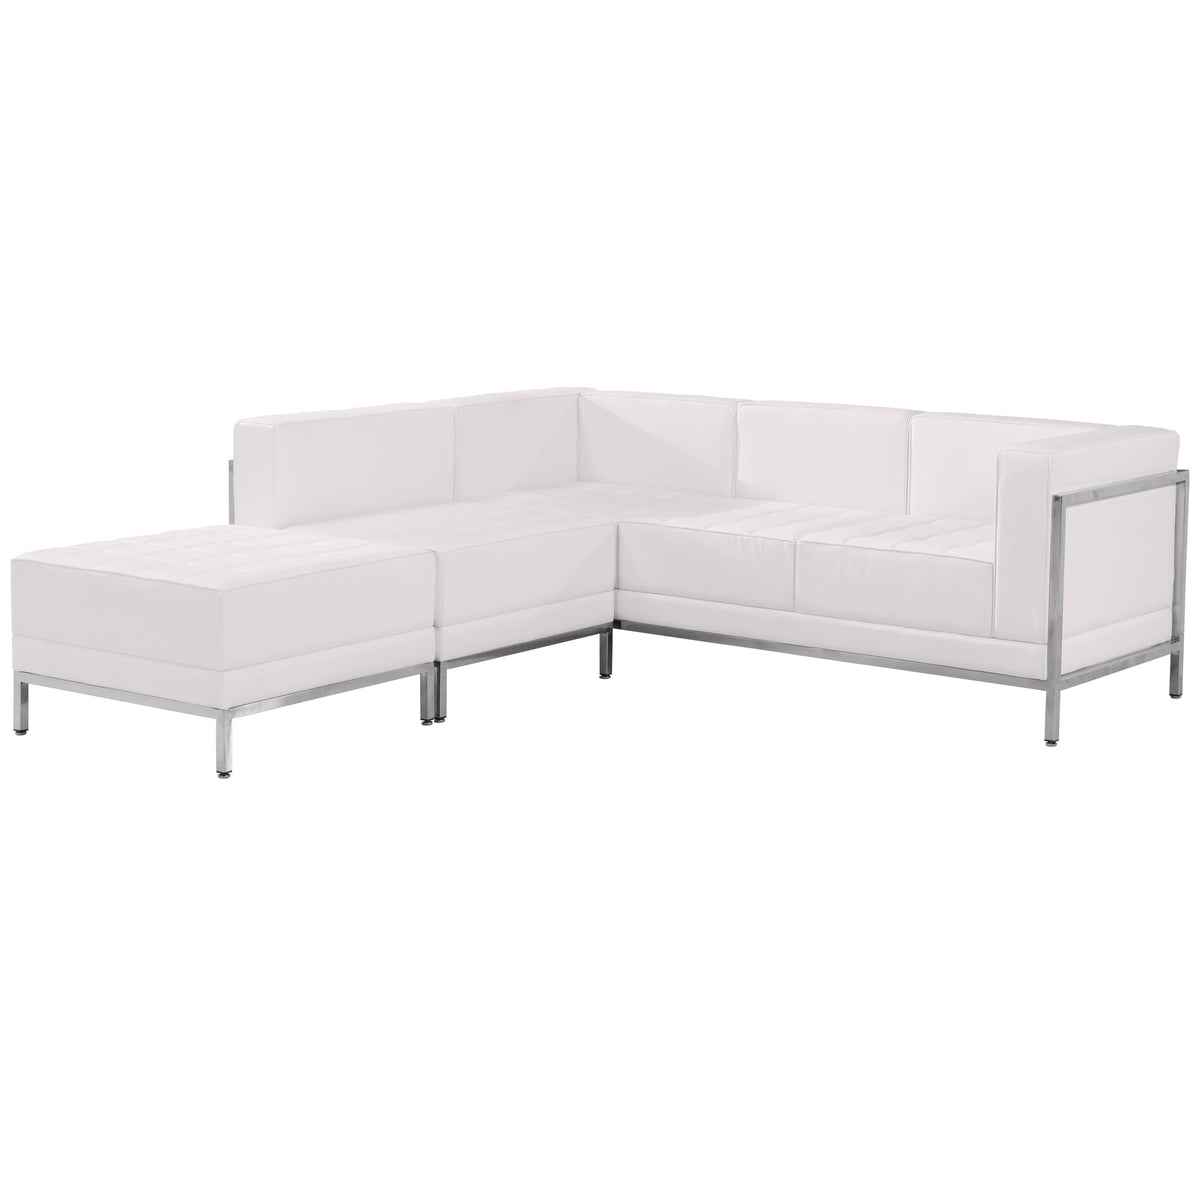 Melrose White |#| 3 Piece White LeatherSoft Modular Sectional Configuration - Stainless Steel Legs